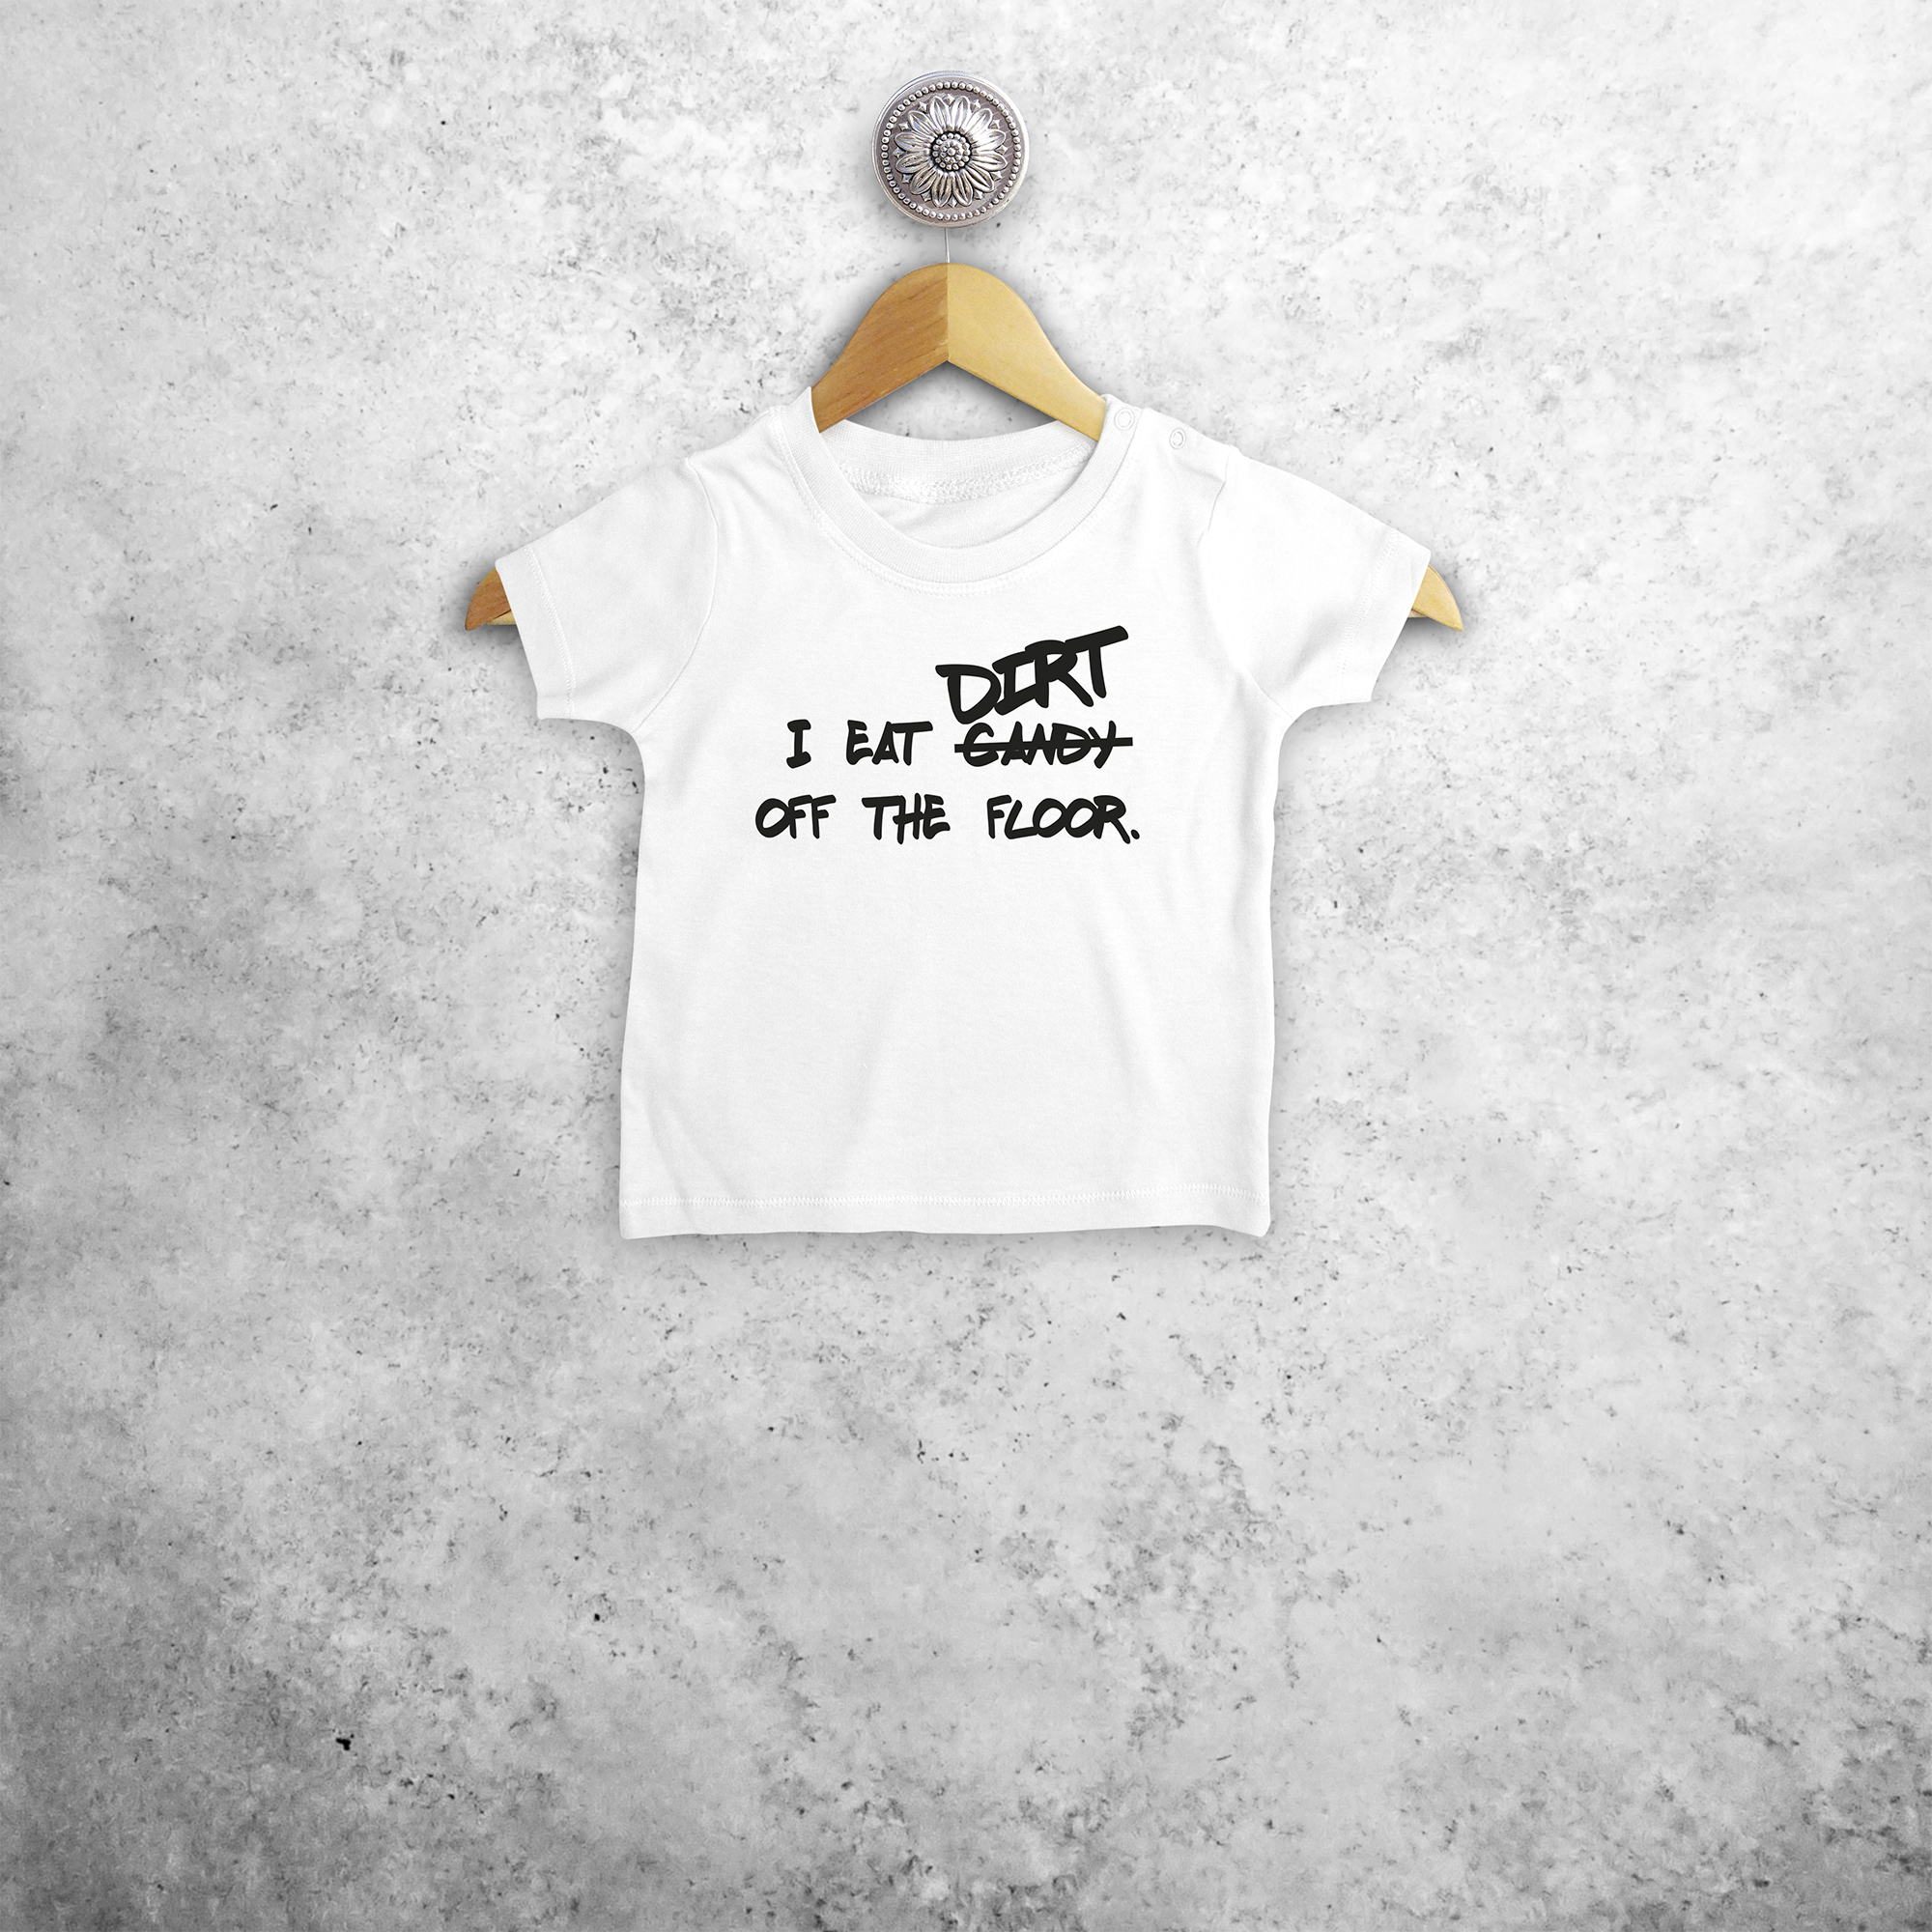 'I eat candy/dirt off the floor.' baby shortsleeve shirt